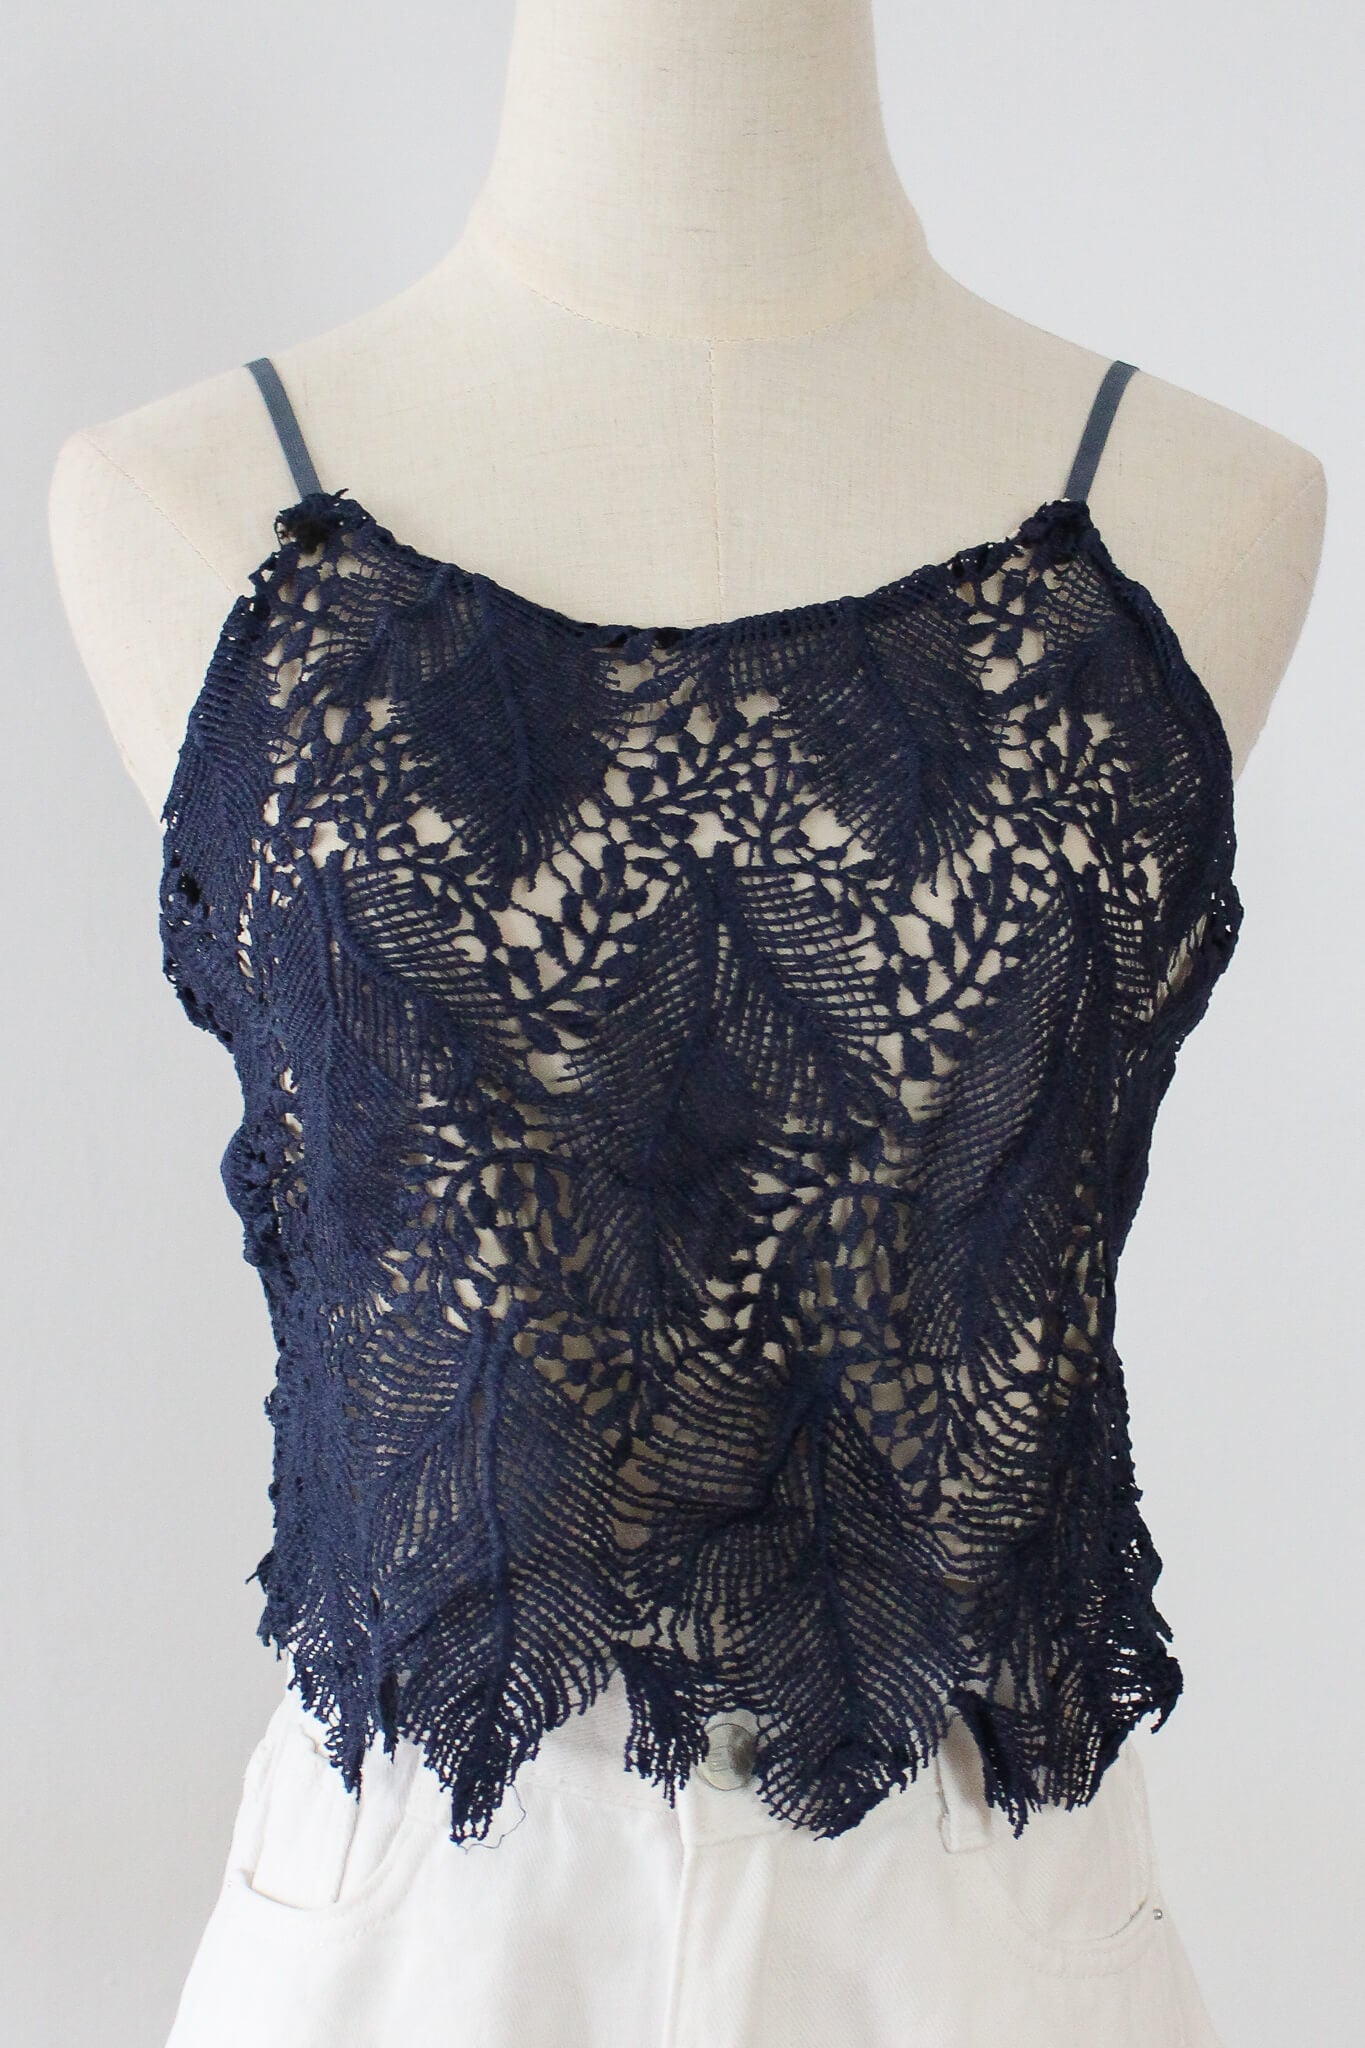 Lace camisole with adjustable straps